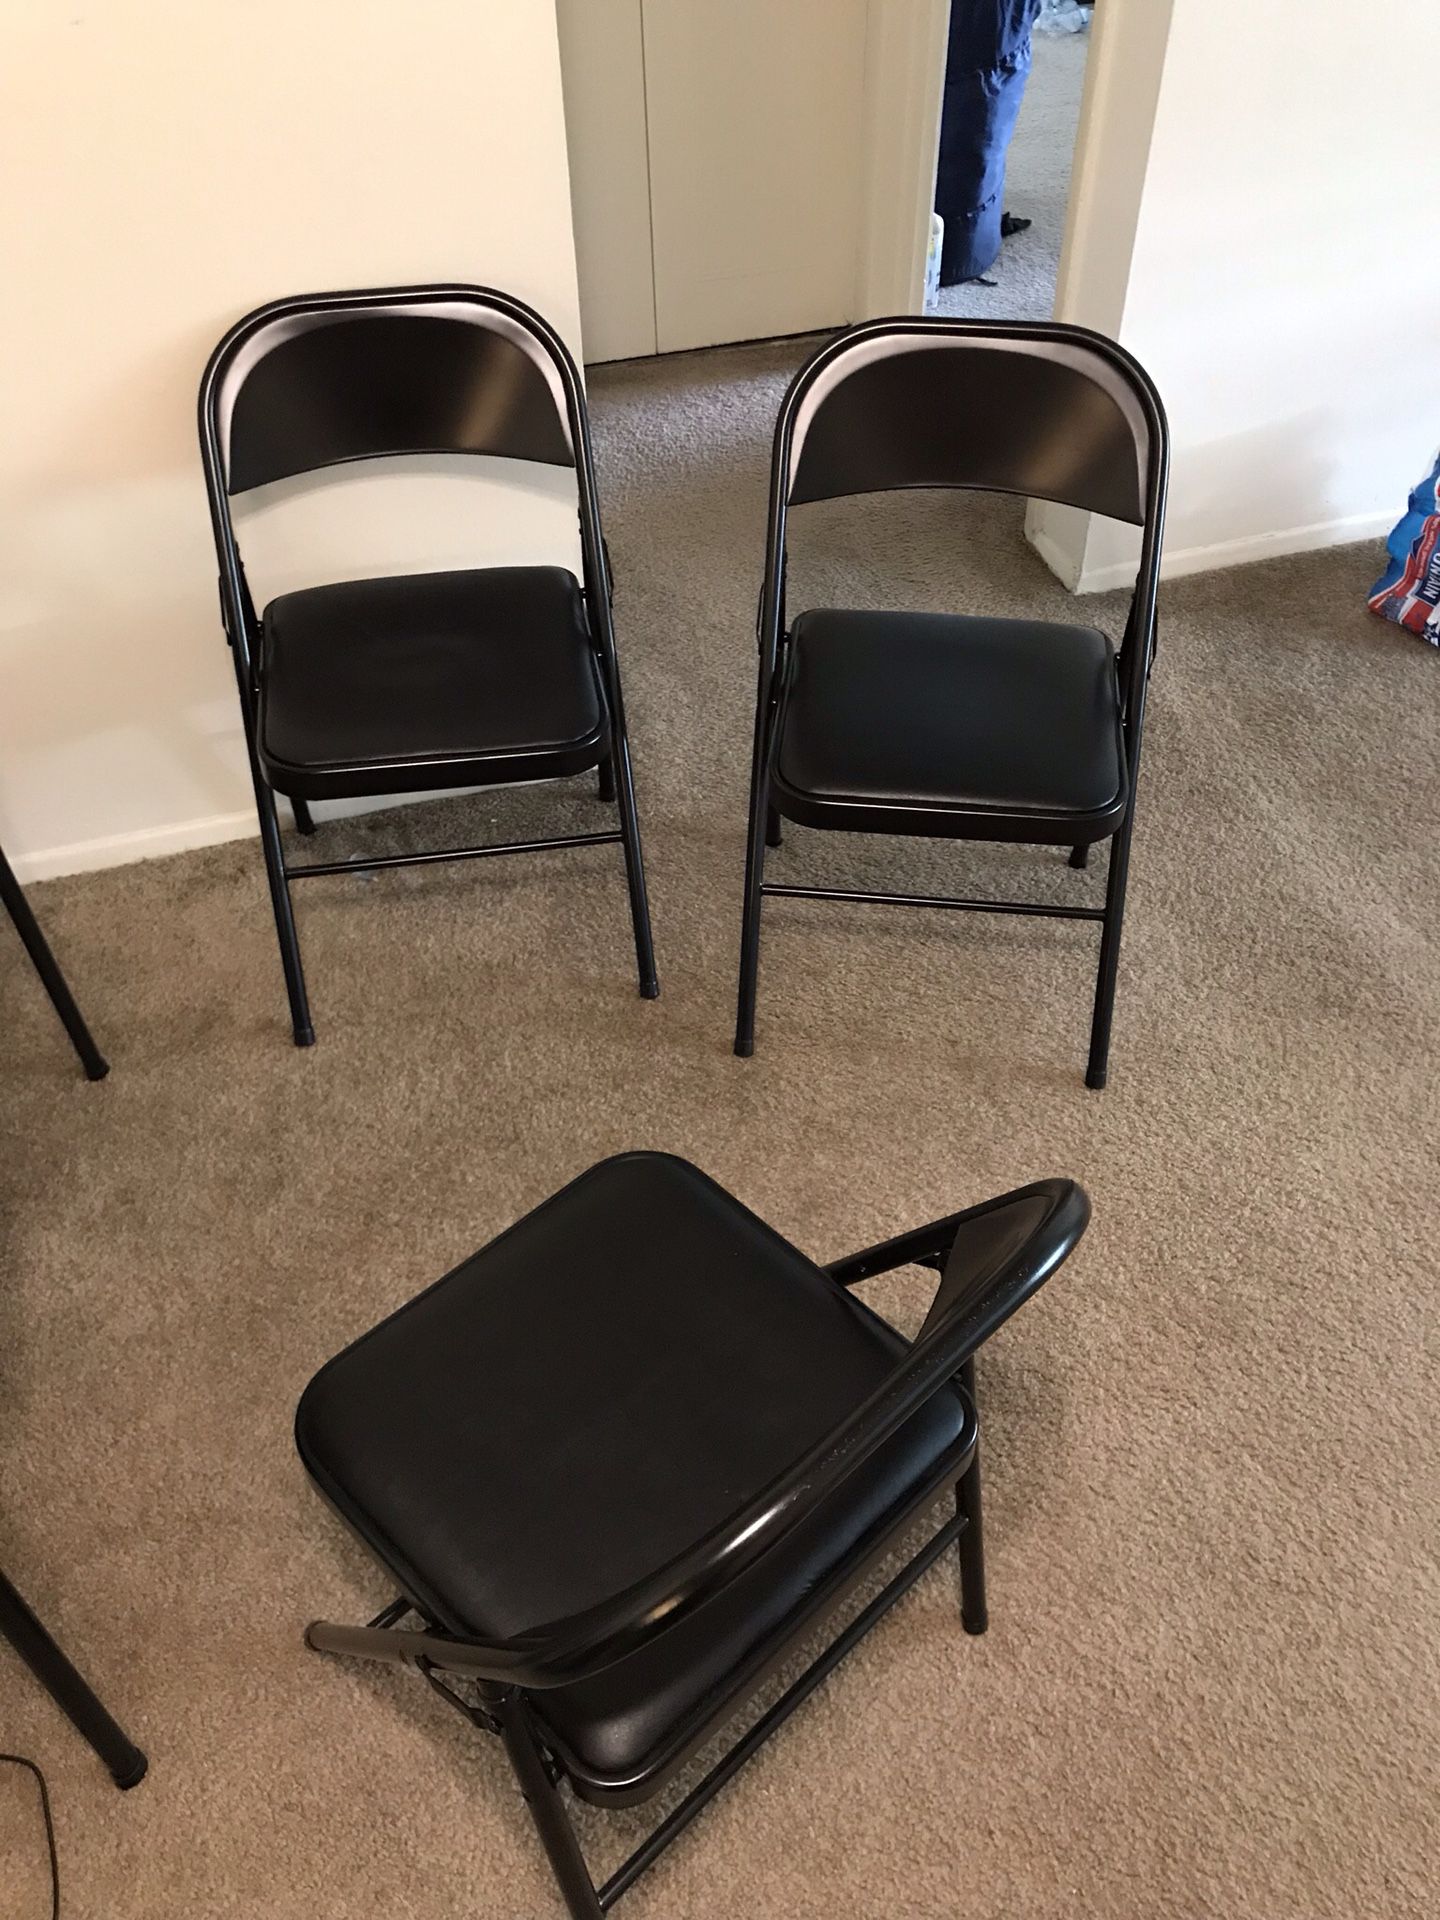 Walmart dining table + 3 chairs